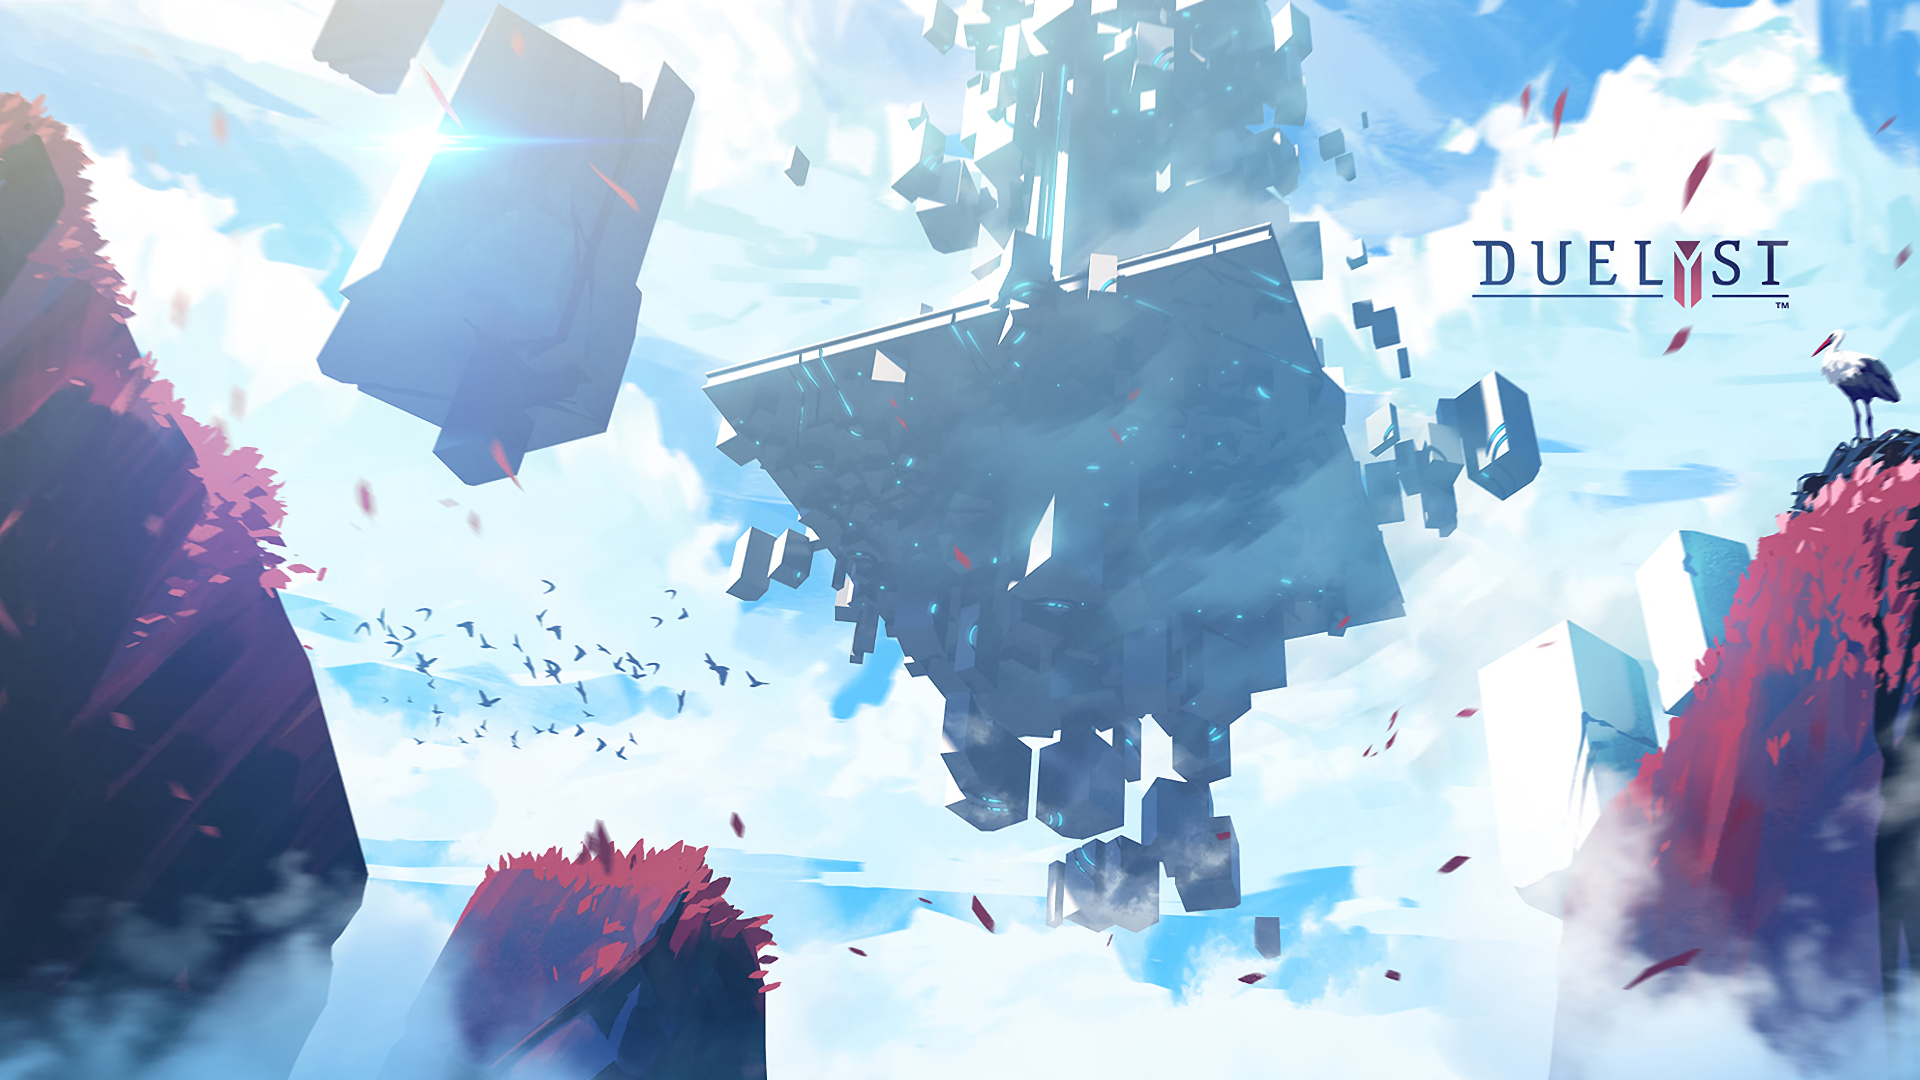 Video Game Duelyst 1920x1080